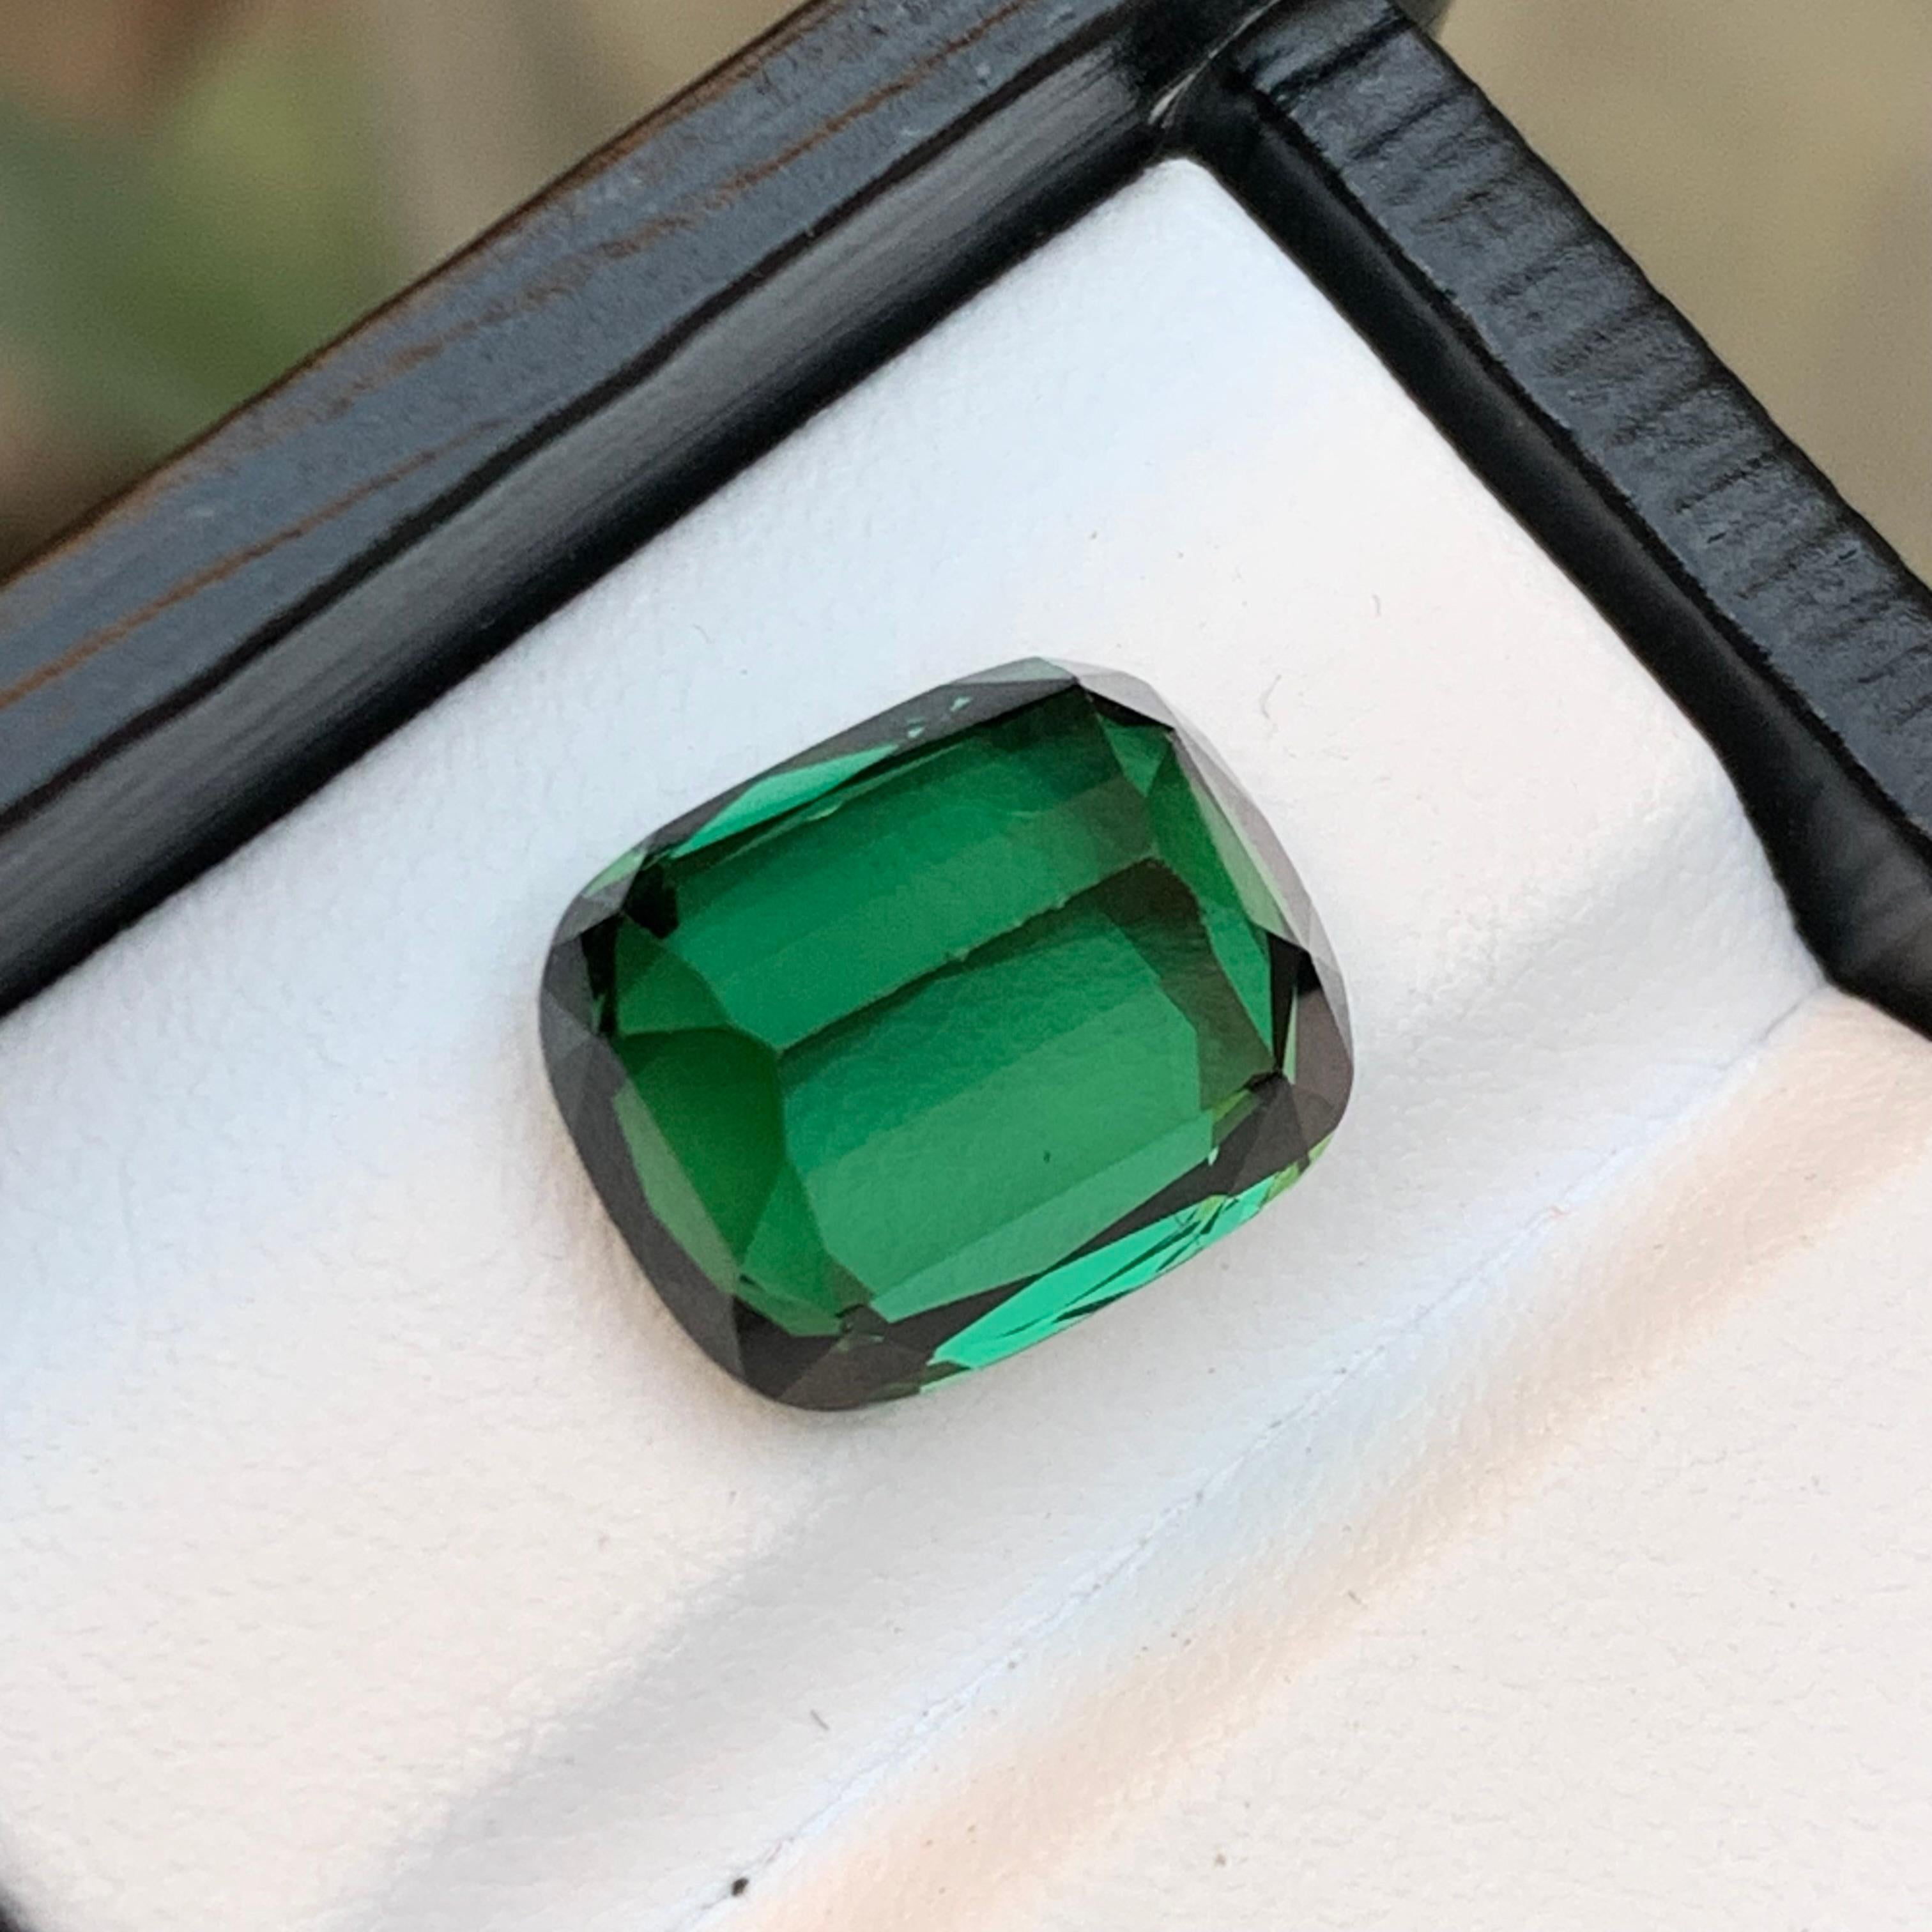 Rare Green Natural Tourmaline Gemstone, 7.65 Ct Cushion Cut for a Ring/Pendant For Sale 2